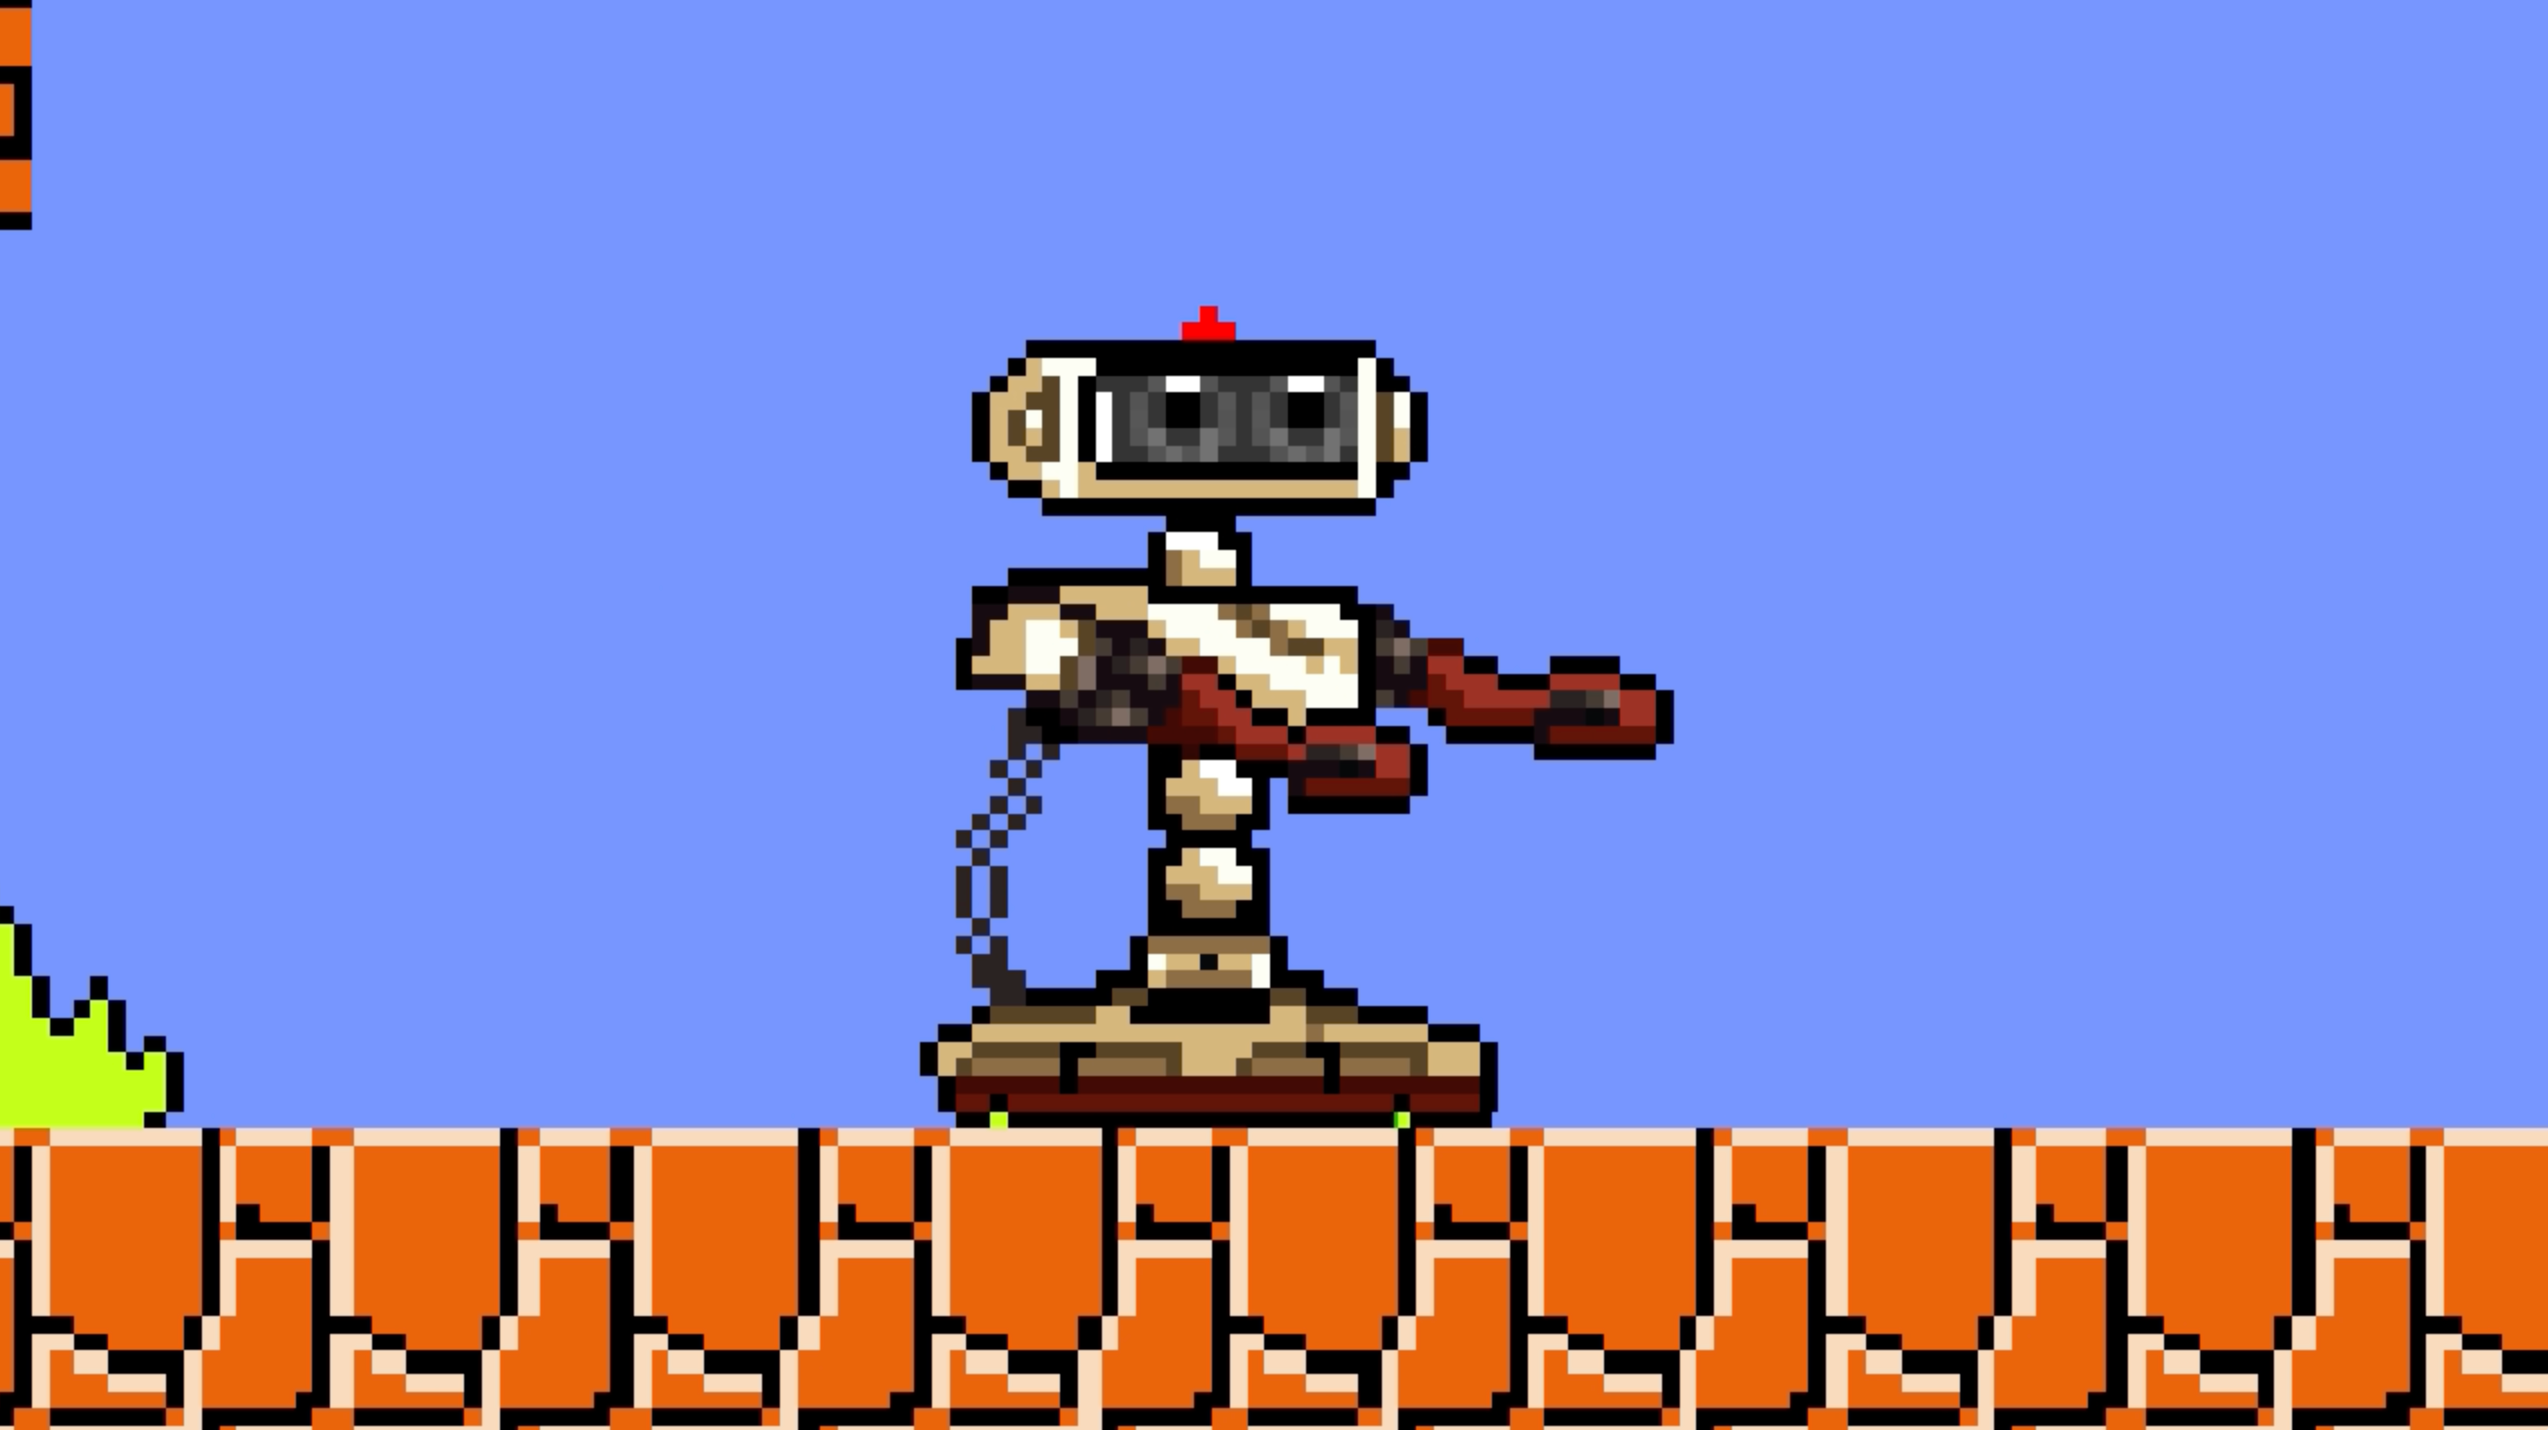 R.O.B. Would Be Op In Super Mario Bros.